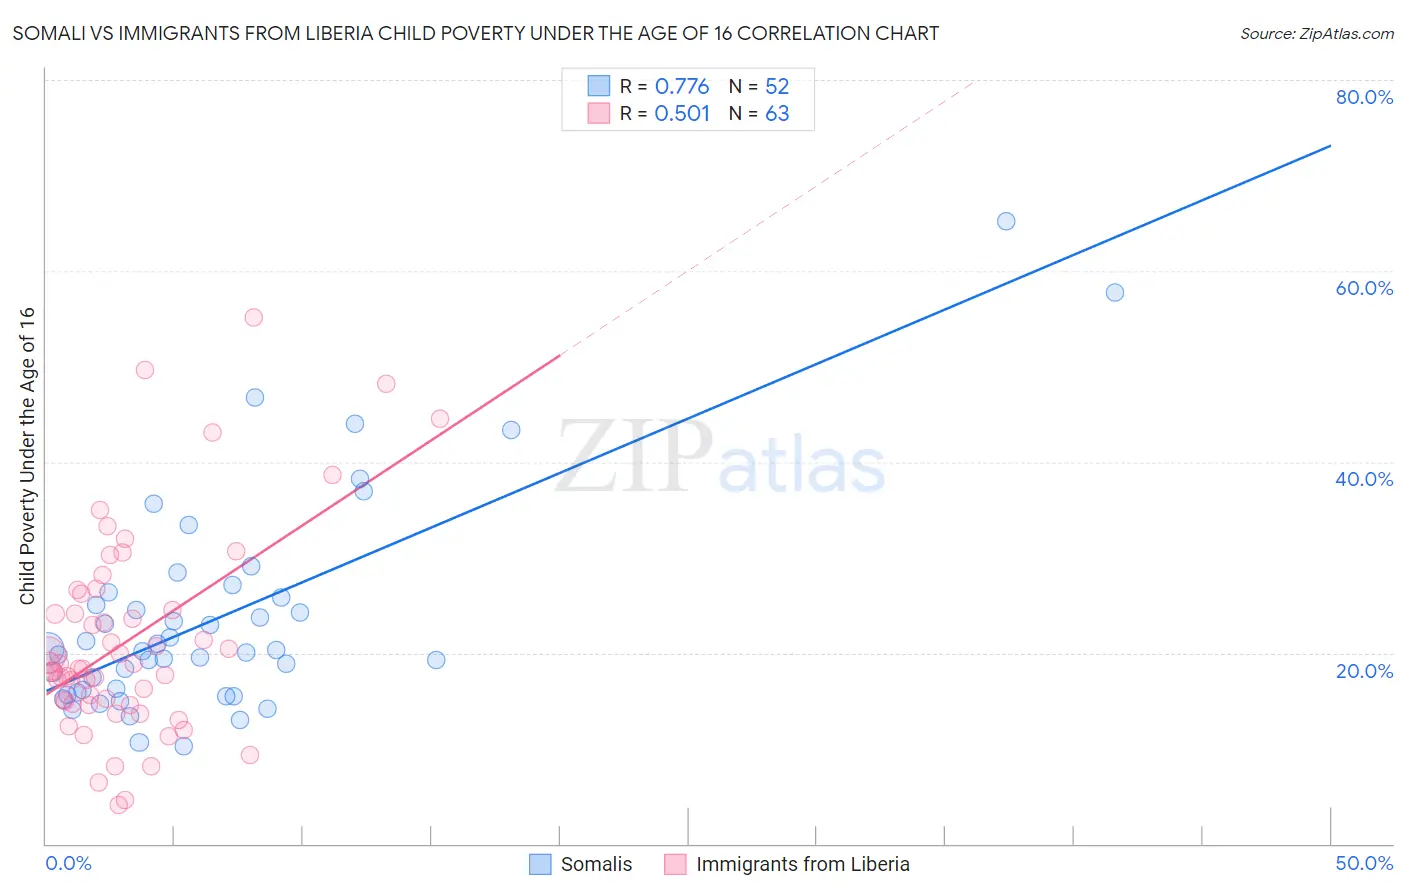 Somali vs Immigrants from Liberia Child Poverty Under the Age of 16